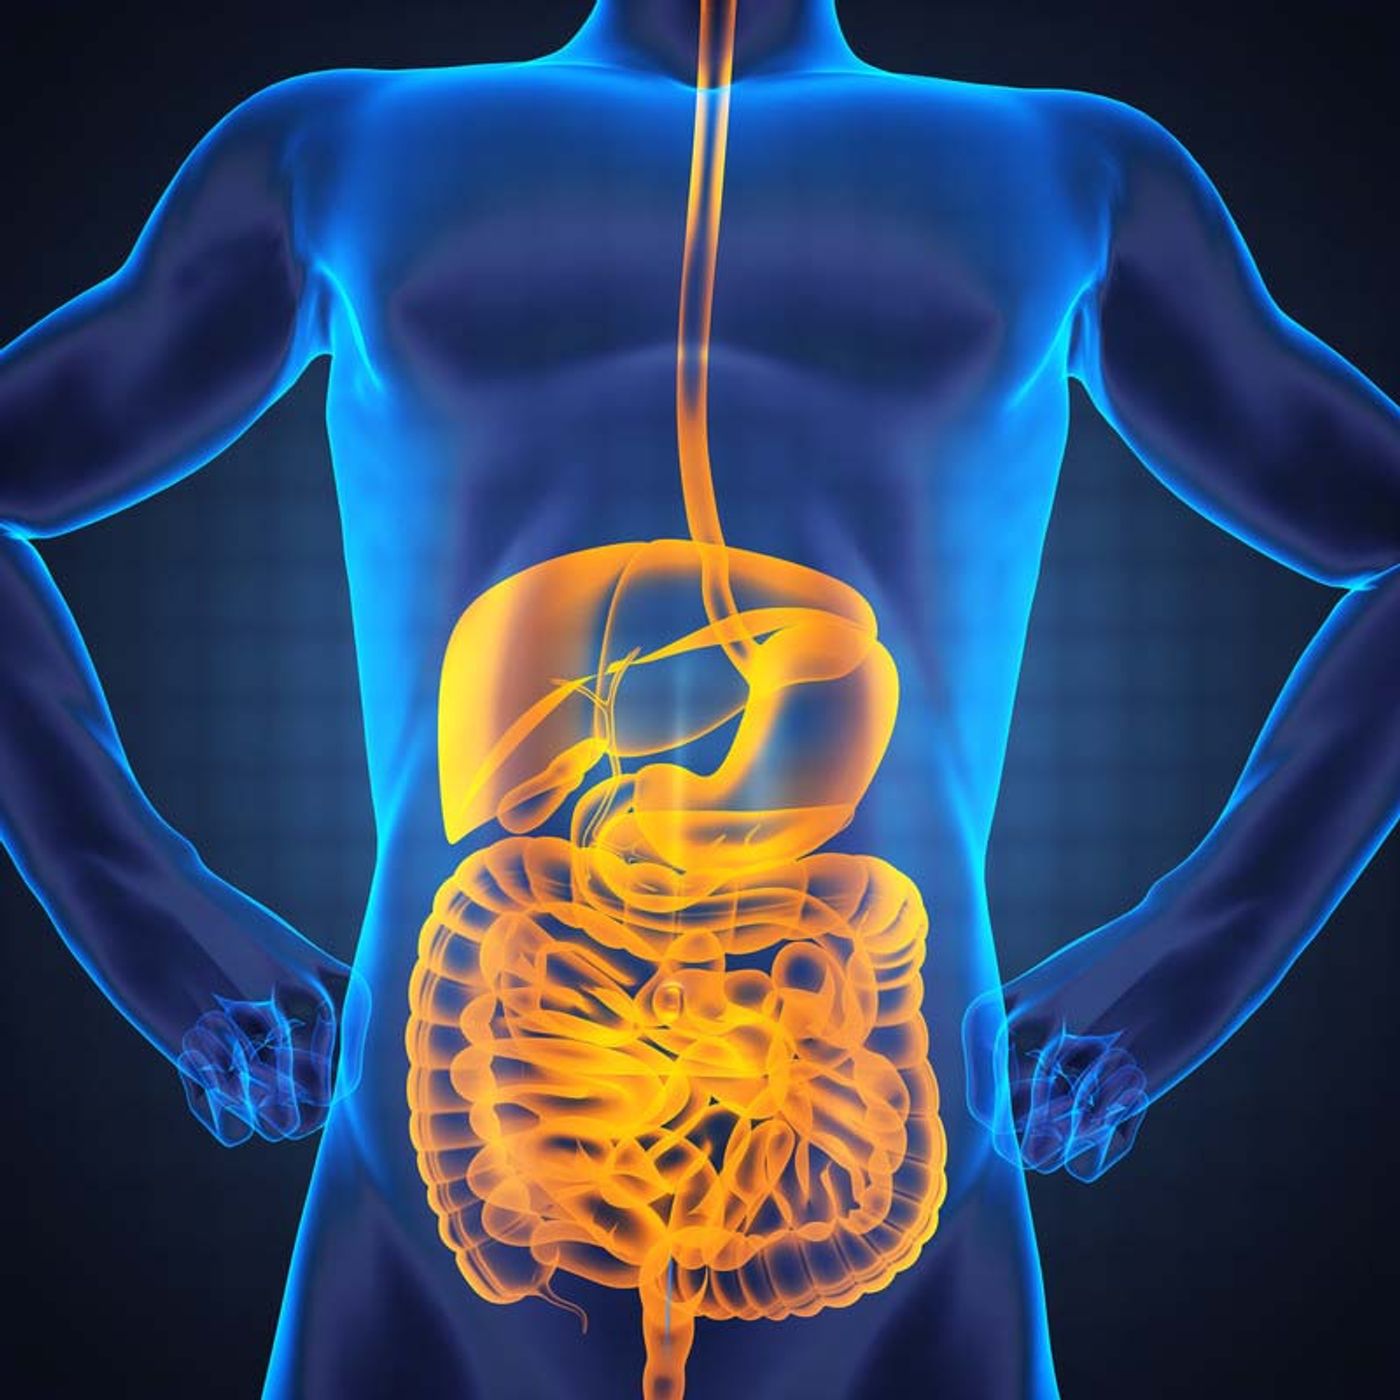 Our gut microbiome, when regulated correctly, helps us with digestion and other processes.